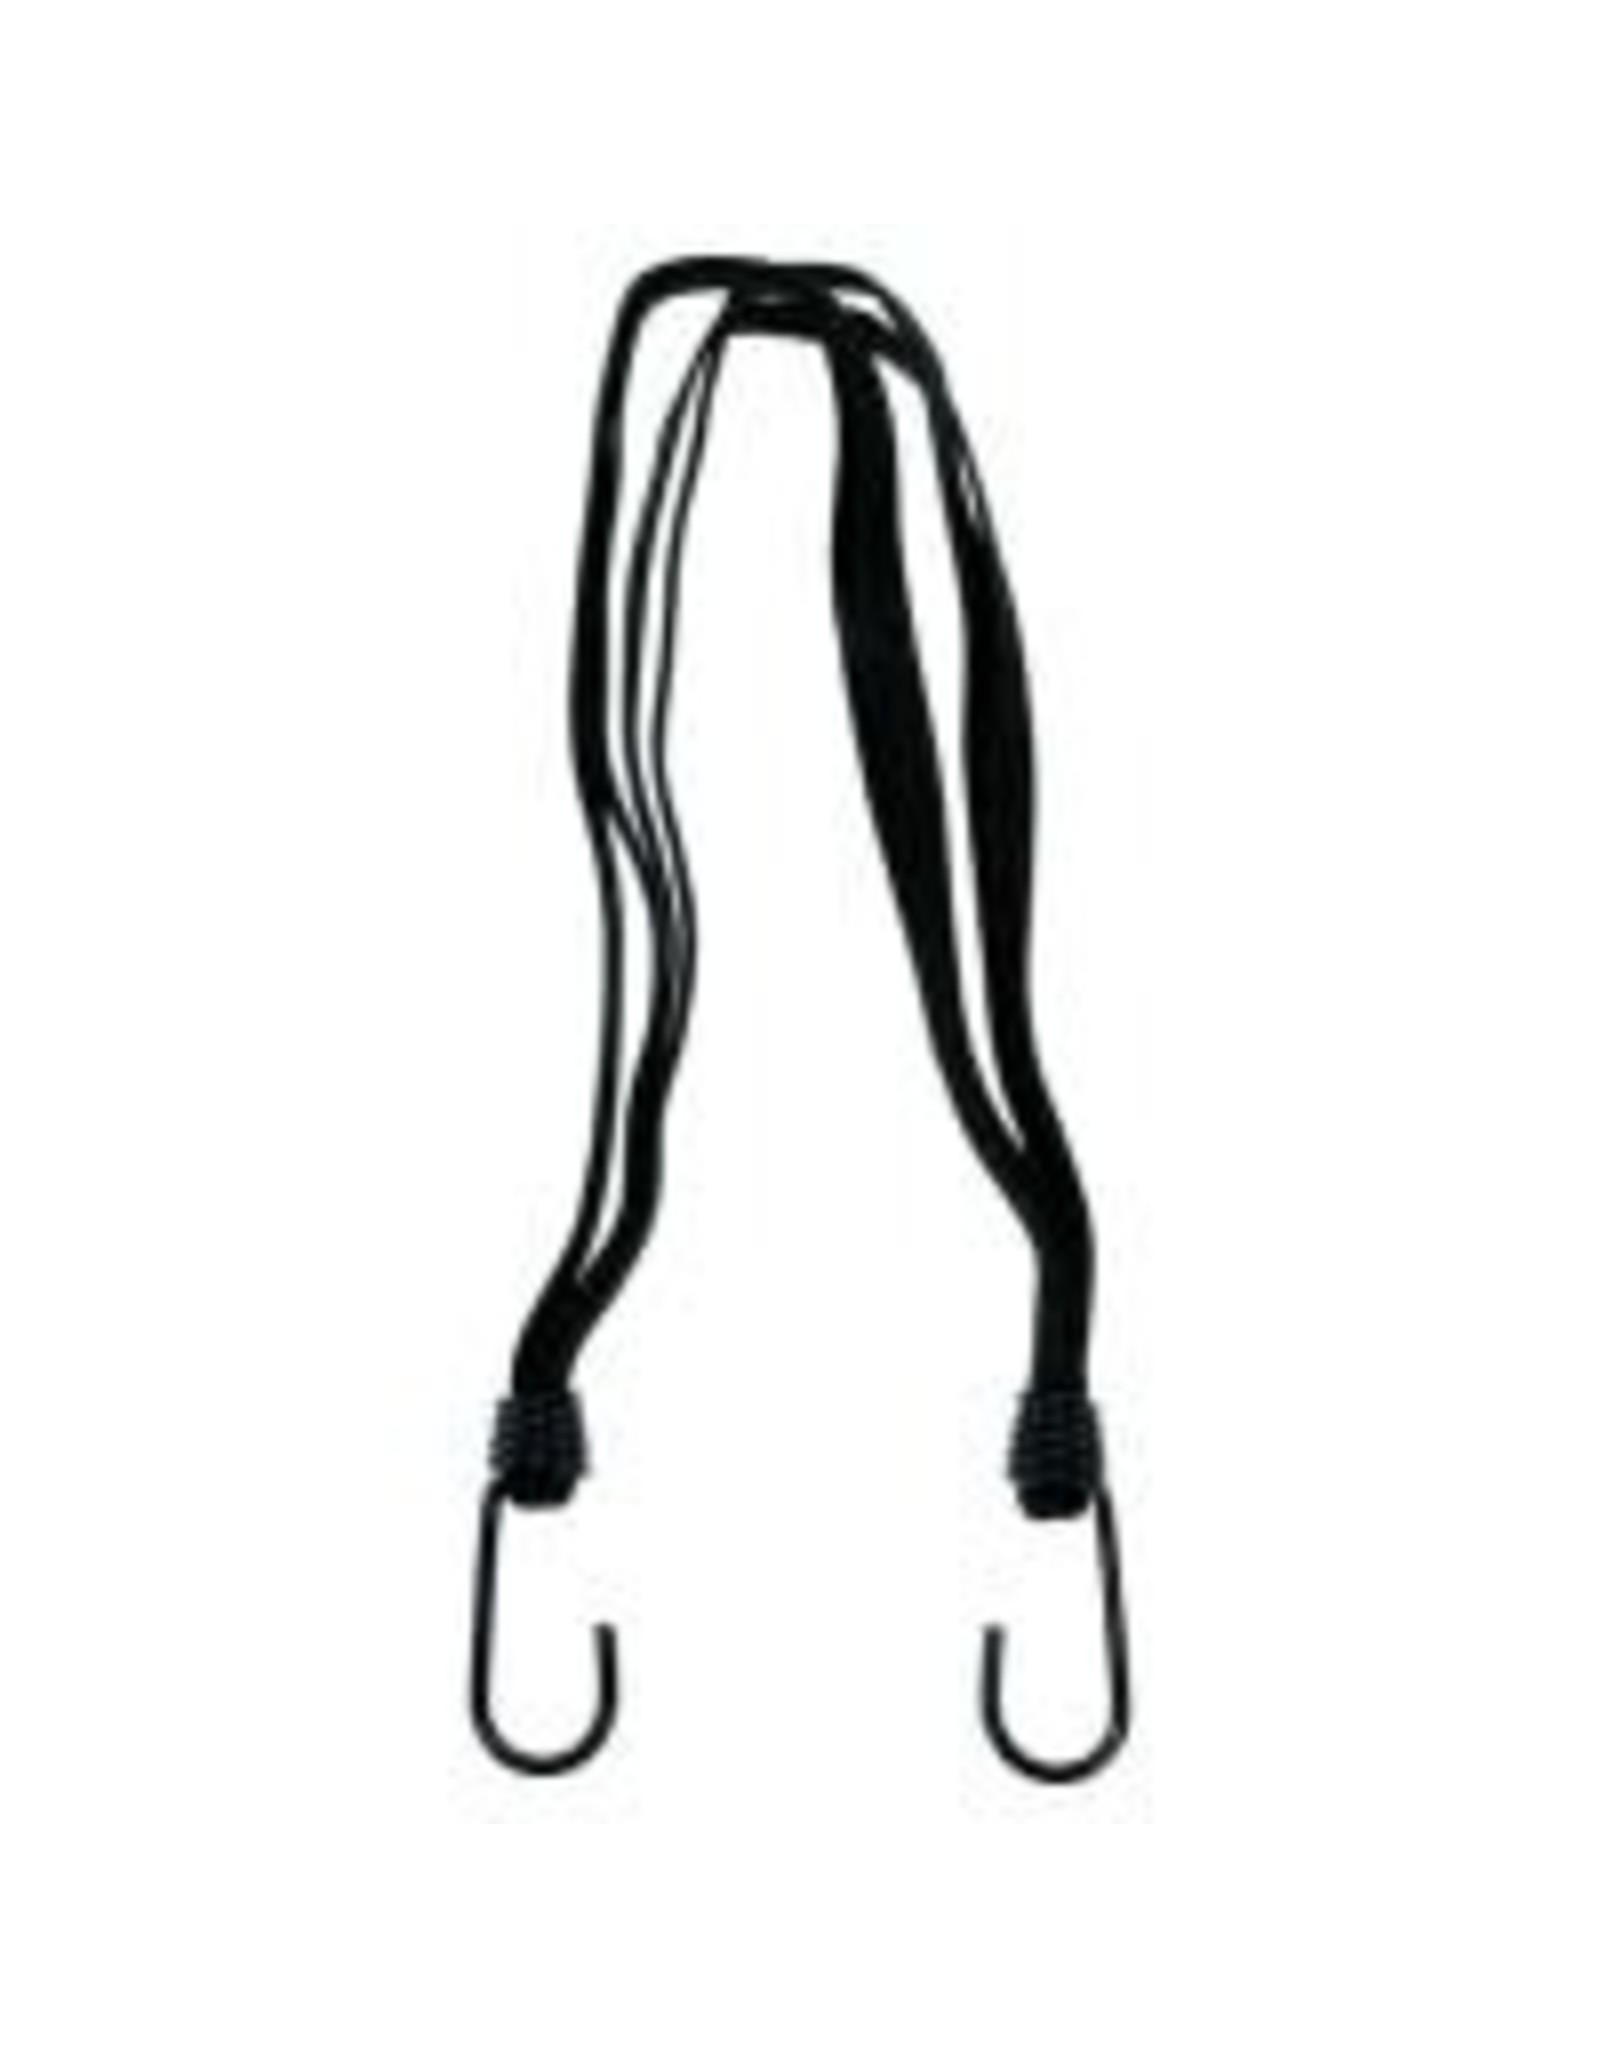 Bungee Cord 3 in 1 with Flat Woven Straps Ebike